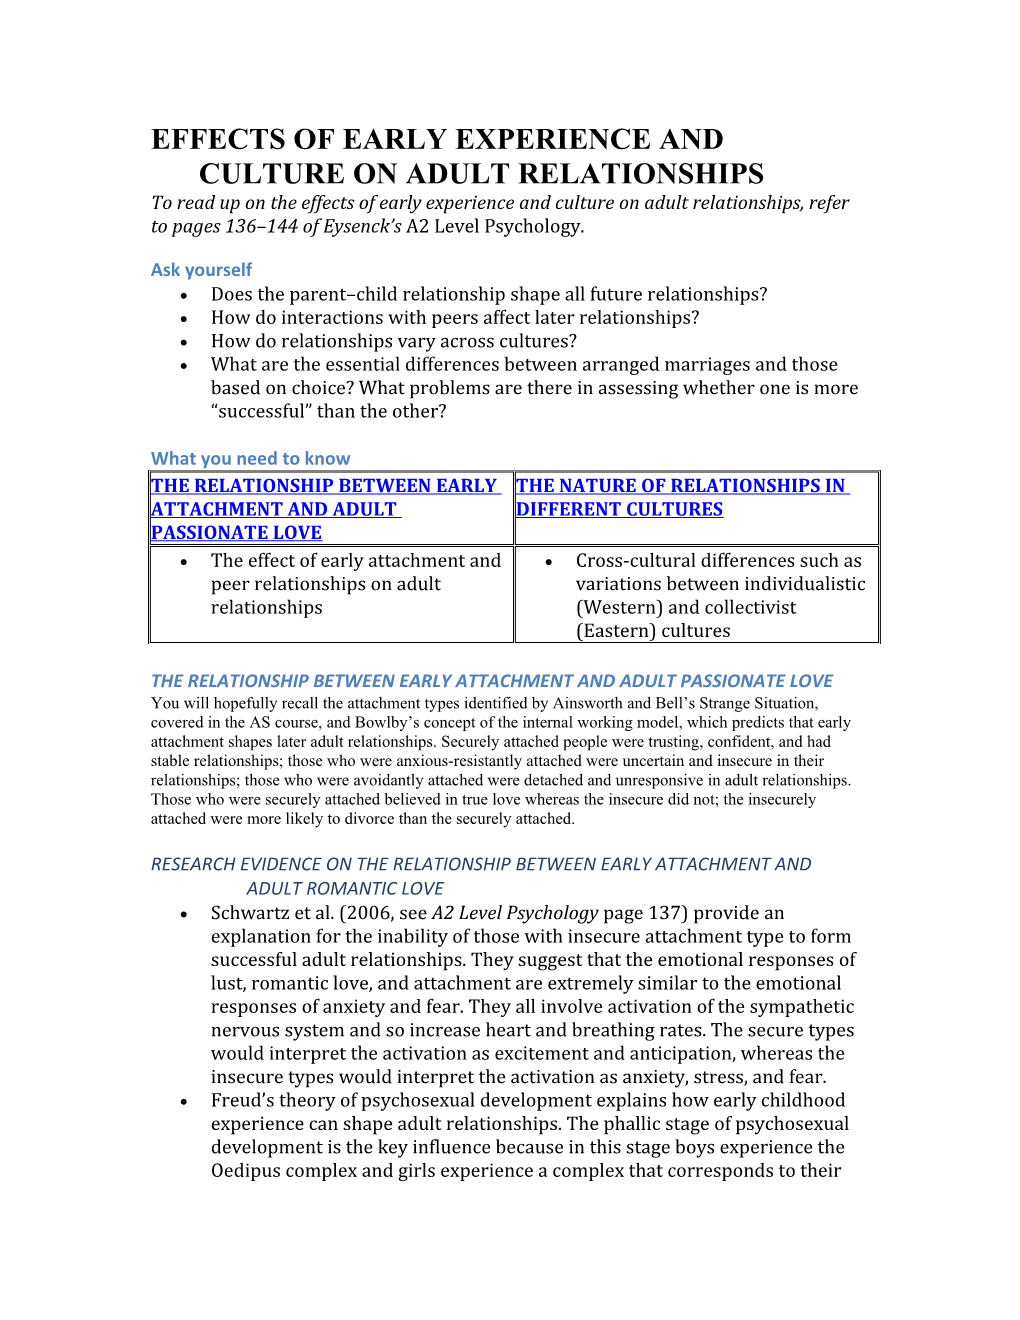 Effects of Early Experience and Culture on Adult Relationships